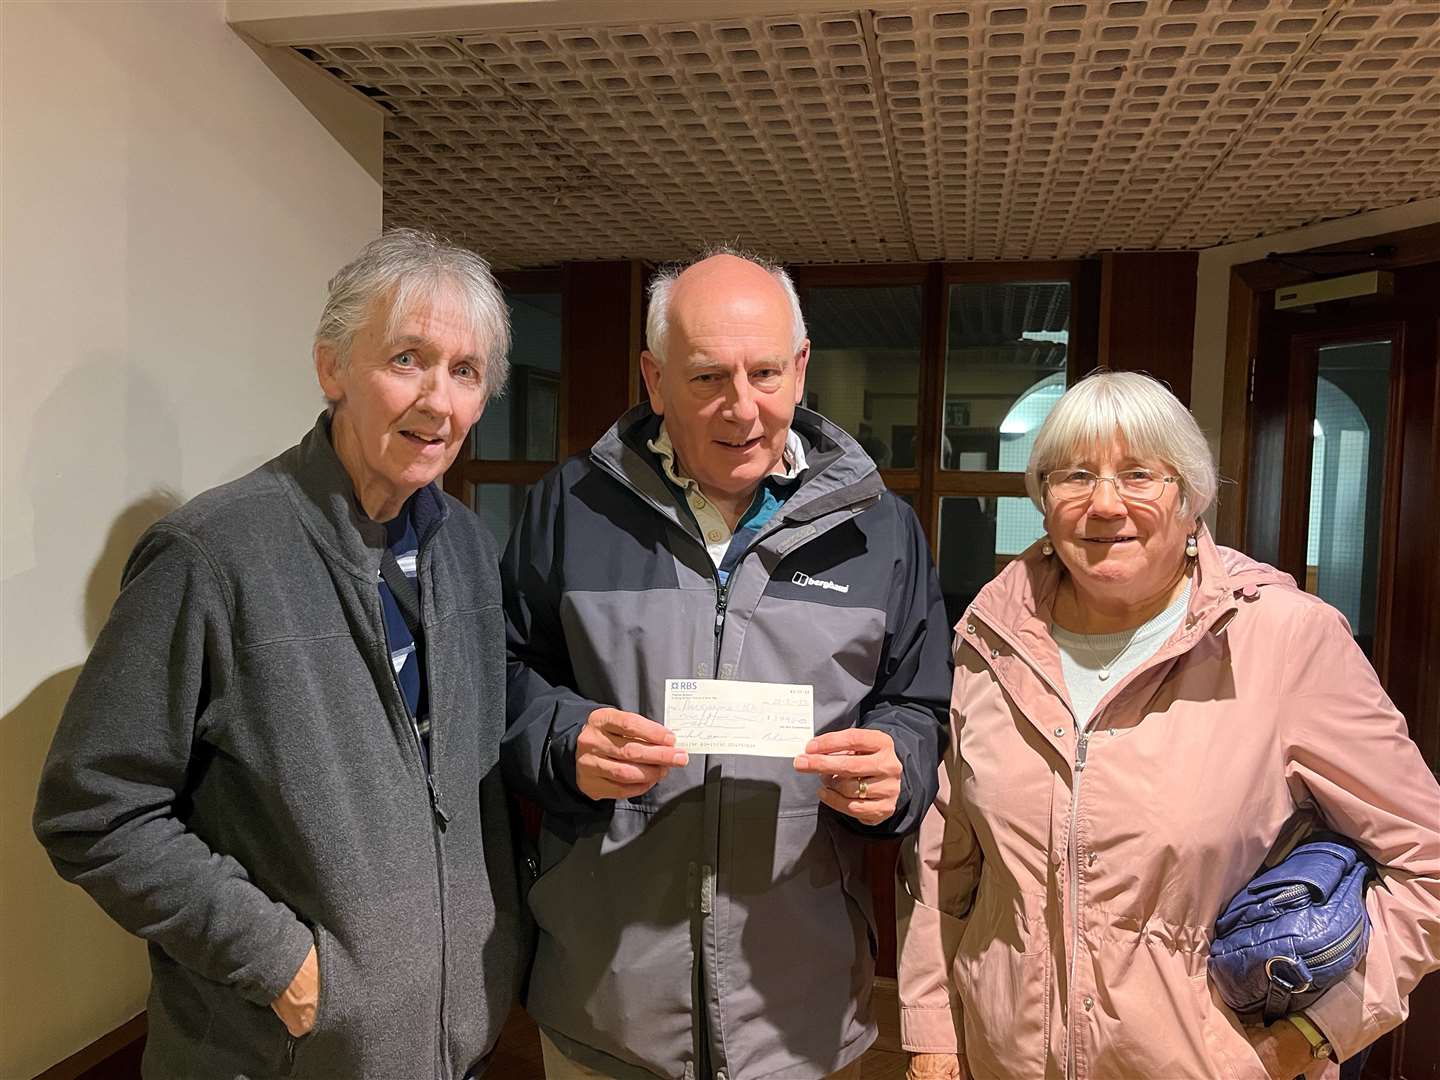 Neil Morrison (centre), chairman of Caithness Parkinson’s Support Group, with Andy Nicolson, who was treasurer until recently, and Sandy Mowat, a former chairperson of the group.